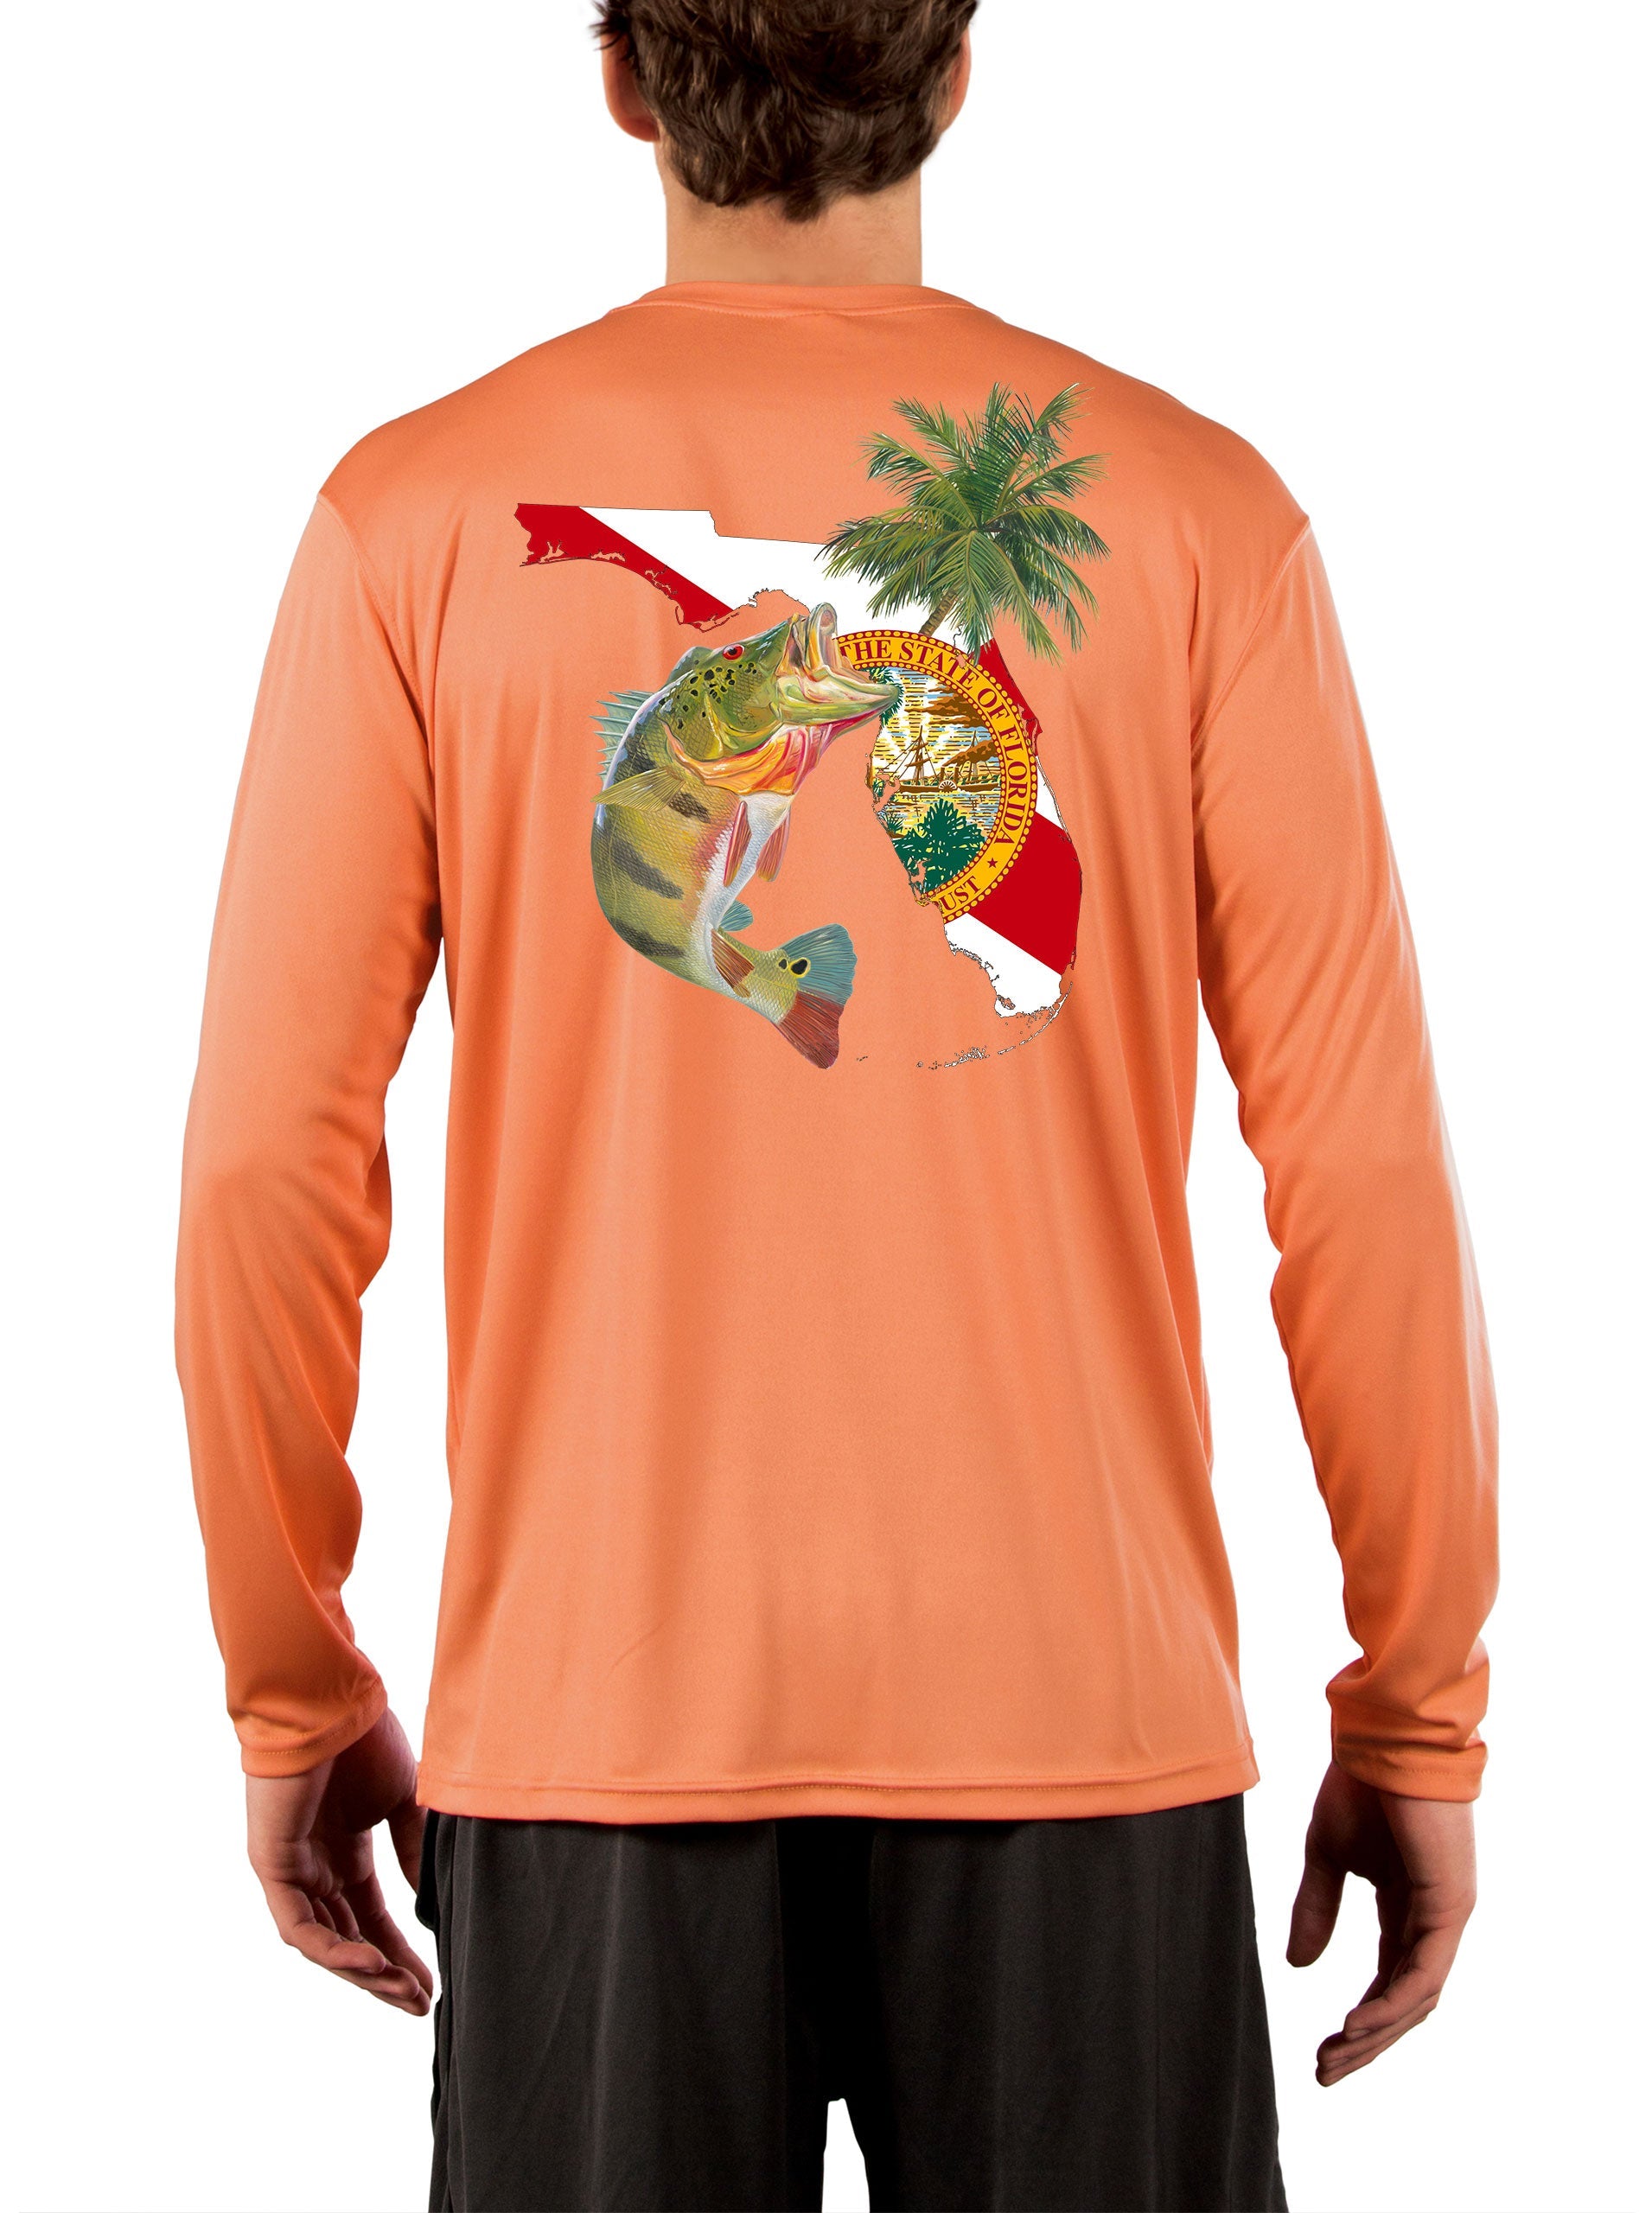 Peacock Bass Florida Map Fishing Shirts for Men with Optional Florida State Flag Sleeve Small / Citrus